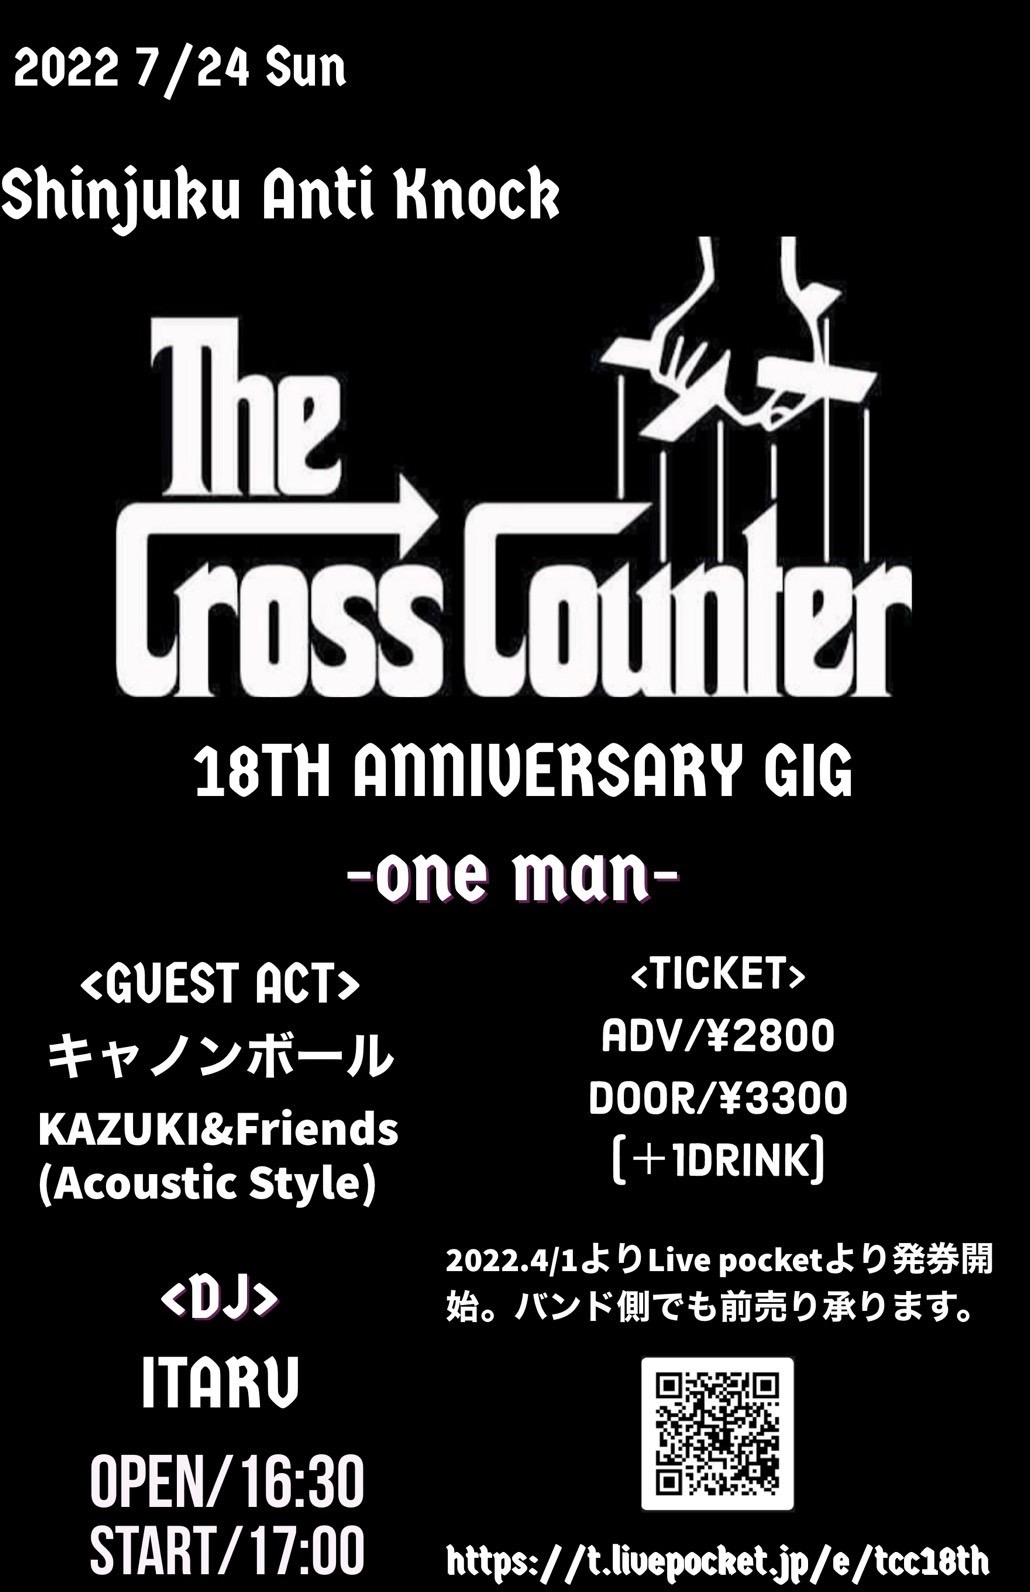 THE→CROSS COUNTER 18TH ANNIVERSARY GIG -ONE MAN-